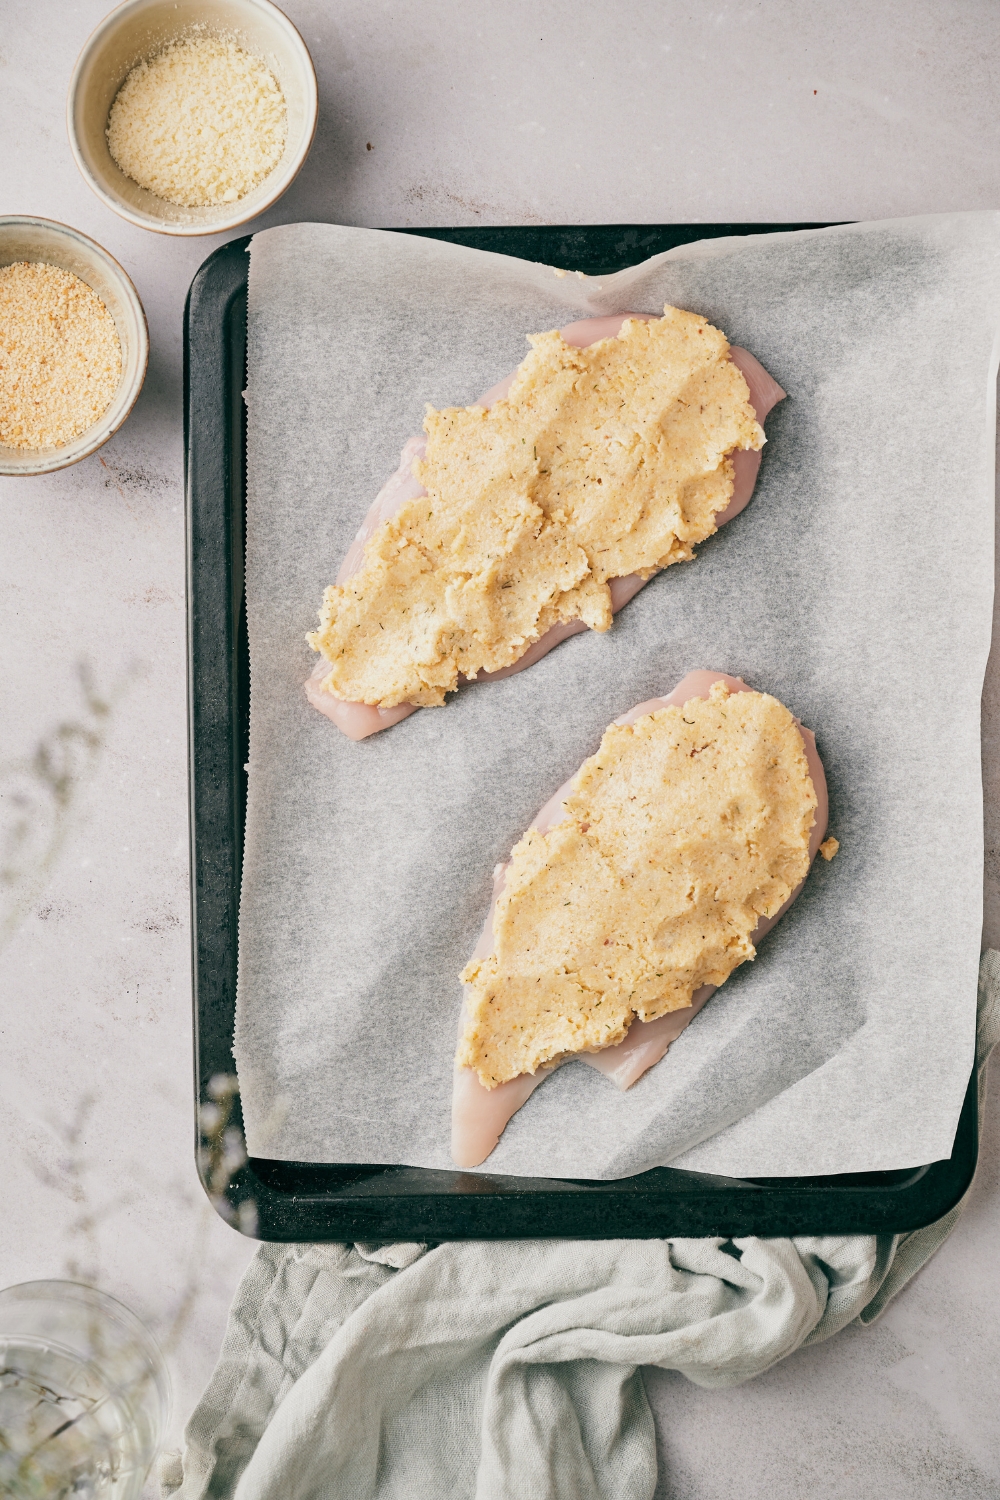 Two raw chicken breasts covered in a seasoned bread crumb mixture on a baking sheet lined with parchment paper.